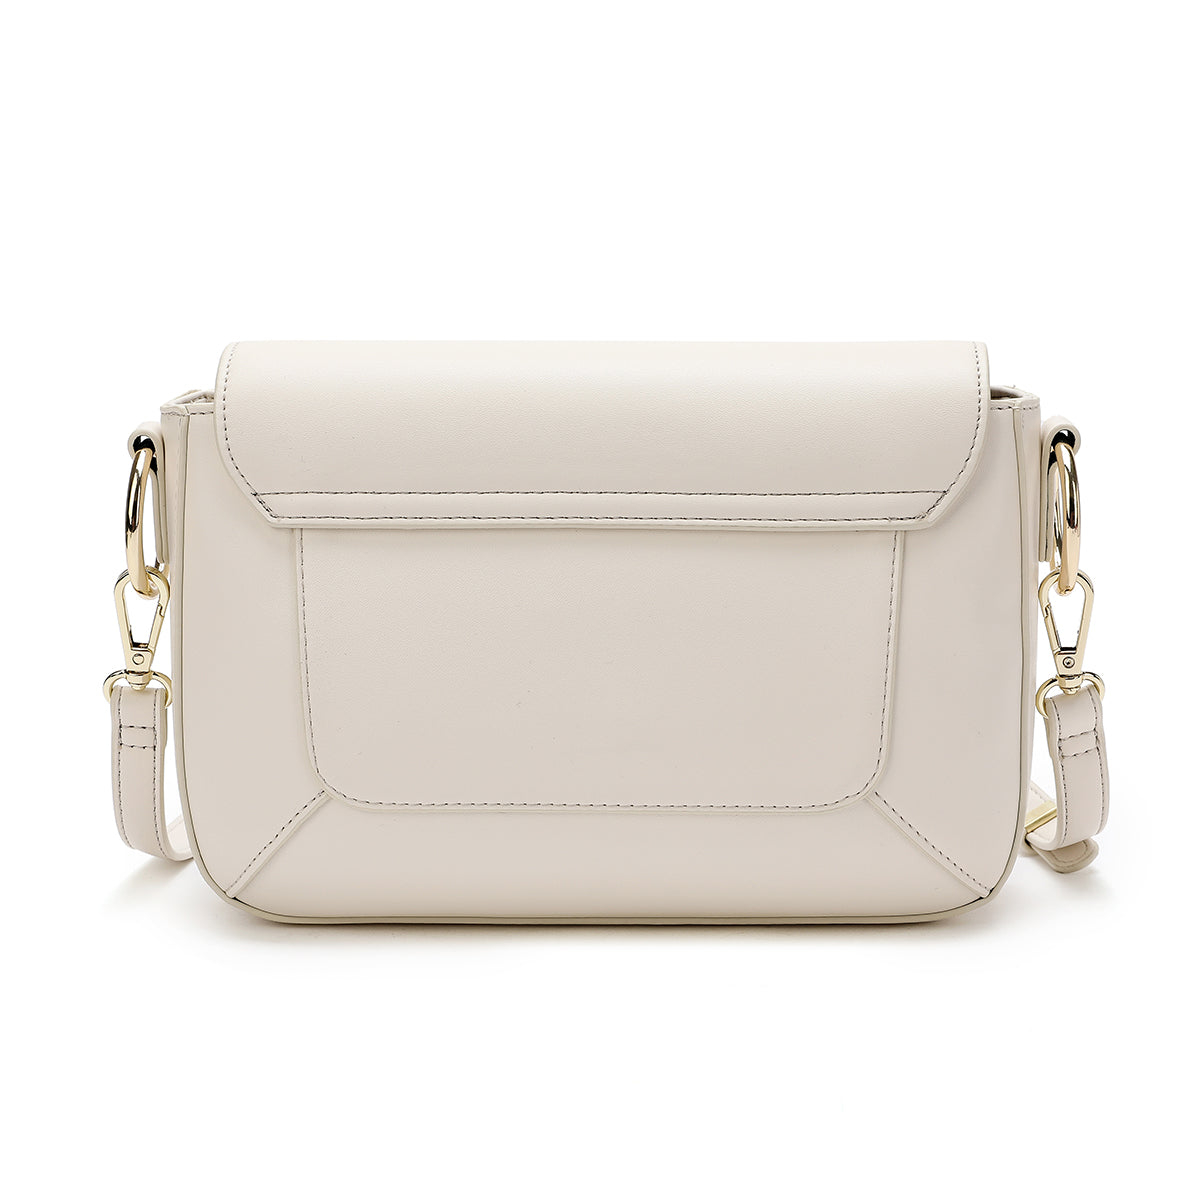 A practical and simple two-tone medium bag